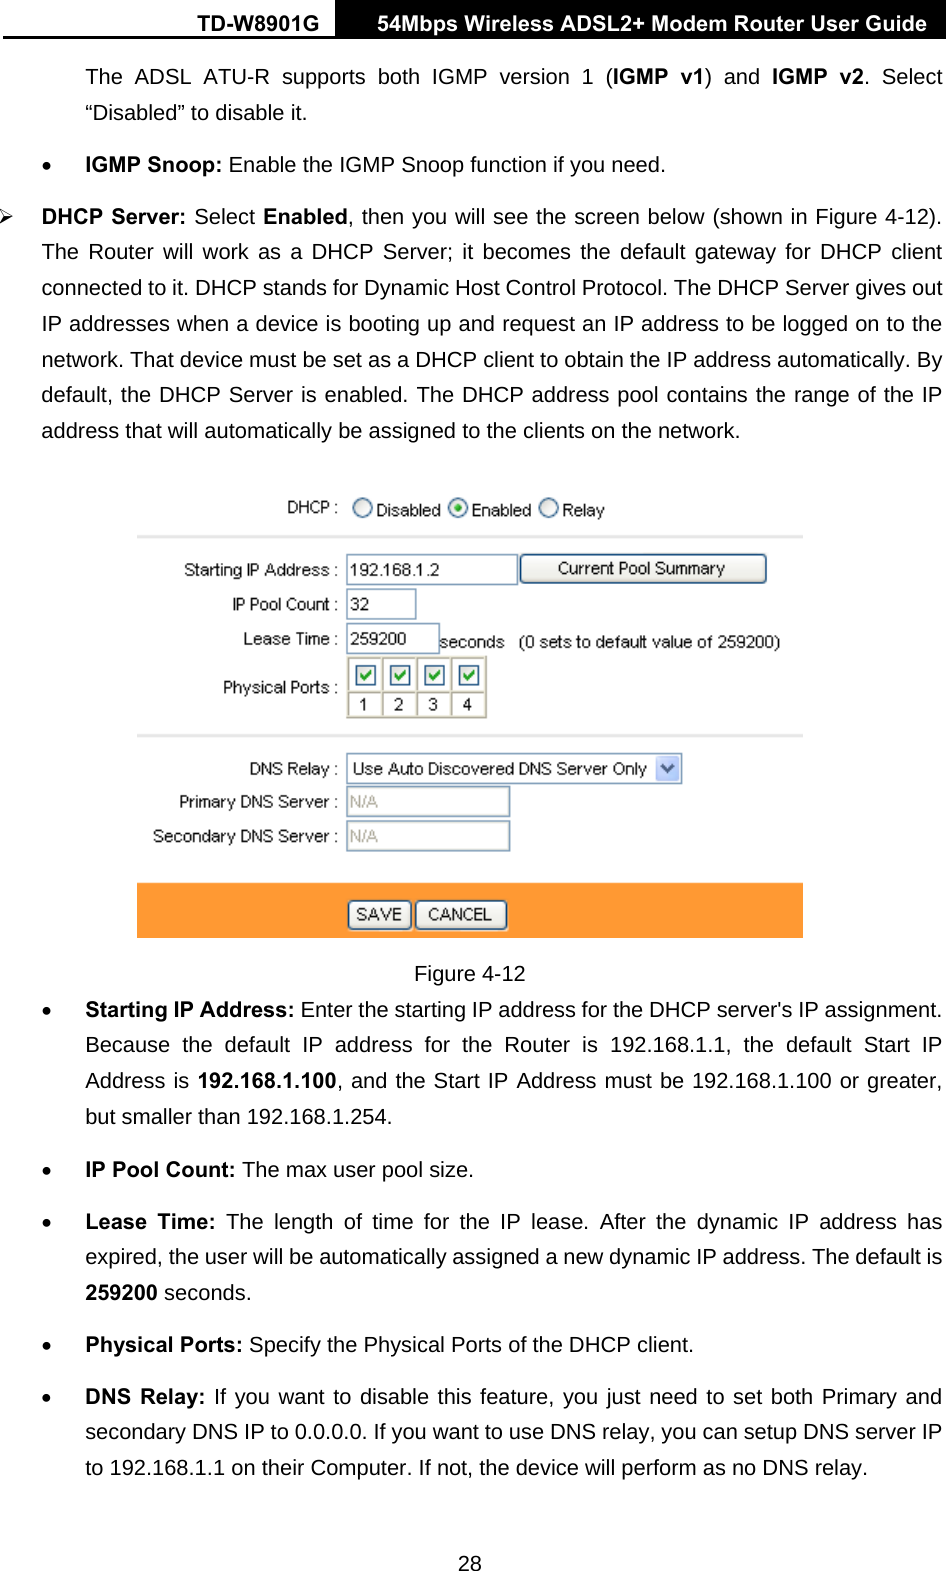 TD-W8901G   54Mbps Wireless ADSL2+ Modem Router User Guide 28 The ADSL ATU-R supports both IGMP version 1 (IGMP v1) and IGMP v2. Select “Disabled” to disable it. • IGMP Snoop: Enable the IGMP Snoop function if you need. ¾ DHCP Server: Select Enabled, then you will see the screen below (shown in Figure 4-12). The Router will work as a DHCP Server; it becomes the default gateway for DHCP client connected to it. DHCP stands for Dynamic Host Control Protocol. The DHCP Server gives out IP addresses when a device is booting up and request an IP address to be logged on to the network. That device must be set as a DHCP client to obtain the IP address automatically. By default, the DHCP Server is enabled. The DHCP address pool contains the range of the IP address that will automatically be assigned to the clients on the network.    Figure 4-12 • Starting IP Address: Enter the starting IP address for the DHCP server&apos;s IP assignment. Because the default IP address for the Router is 192.168.1.1, the default Start IP Address is 192.168.1.100, and the Start IP Address must be 192.168.1.100 or greater, but smaller than 192.168.1.254. • IP Pool Count: The max user pool size. • Lease Time: The length of time for the IP lease. After the dynamic IP address has expired, the user will be automatically assigned a new dynamic IP address. The default is 259200 seconds. • Physical Ports: Specify the Physical Ports of the DHCP client. • DNS Relay: If you want to disable this feature, you just need to set both Primary and secondary DNS IP to 0.0.0.0. If you want to use DNS relay, you can setup DNS server IP to 192.168.1.1 on their Computer. If not, the device will perform as no DNS relay. 